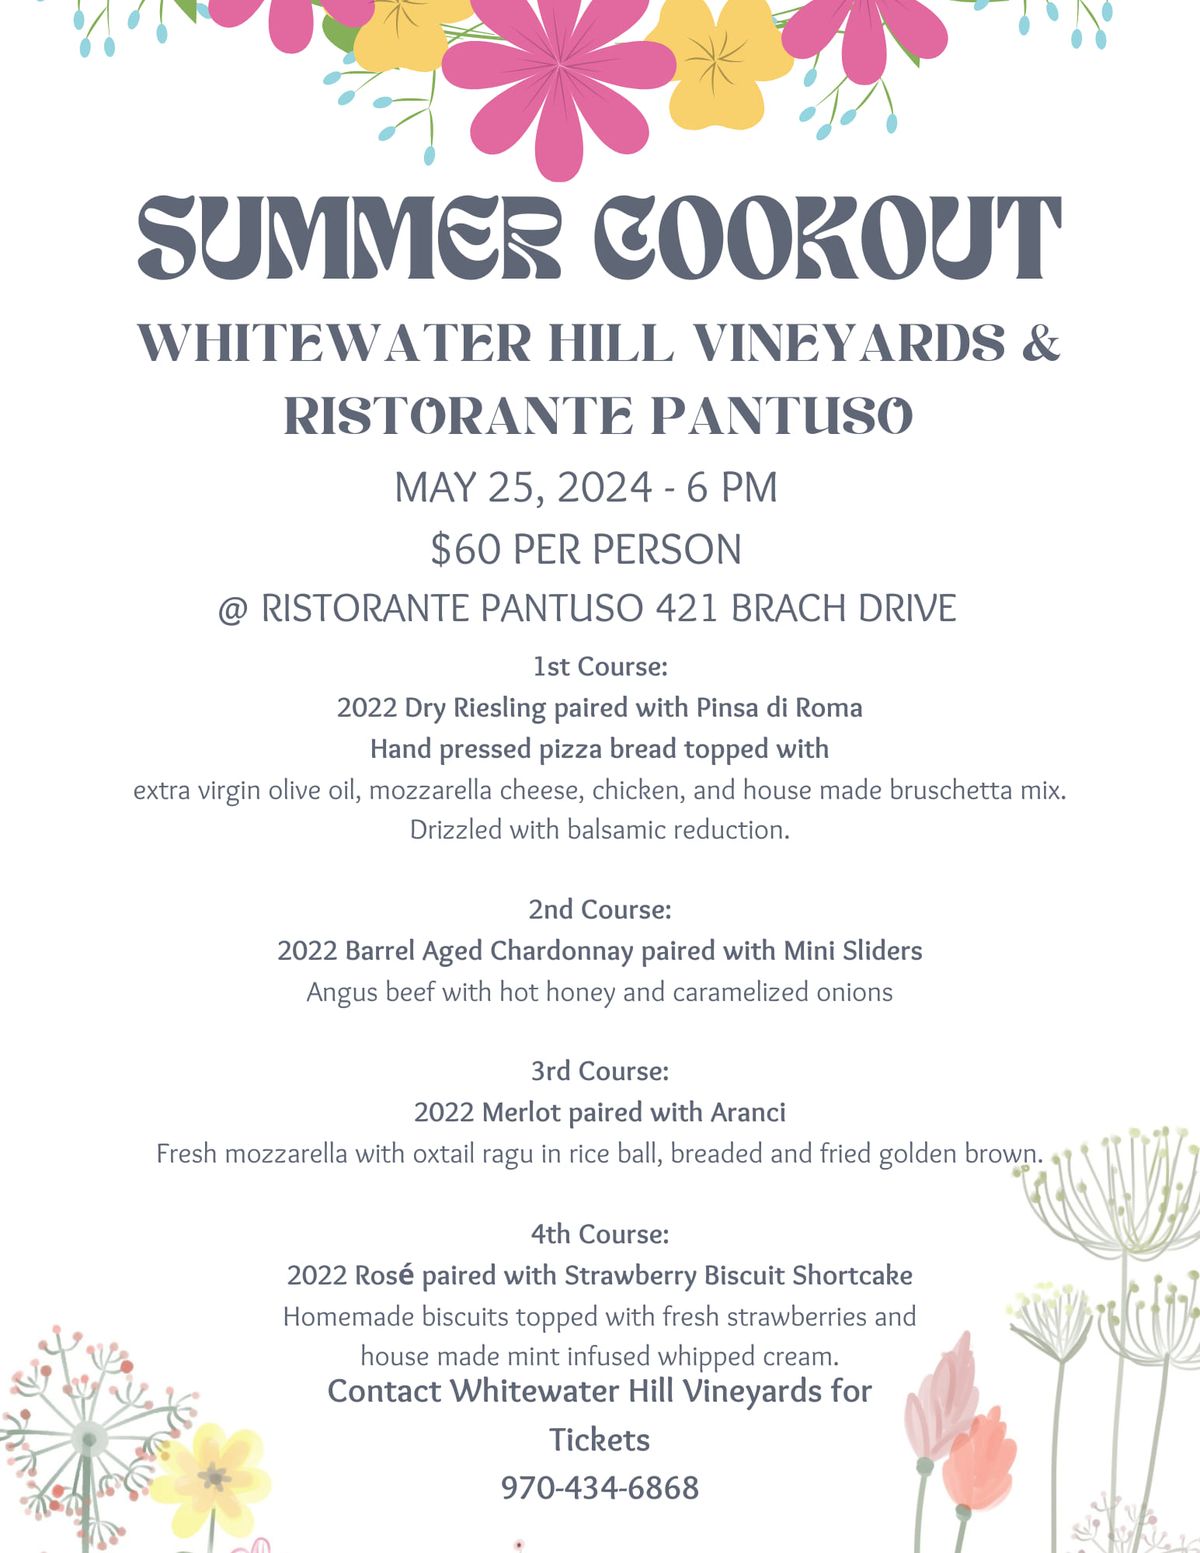 Summer Cookout with Whitewater Hill Vineyards & Ristorante Pantuso